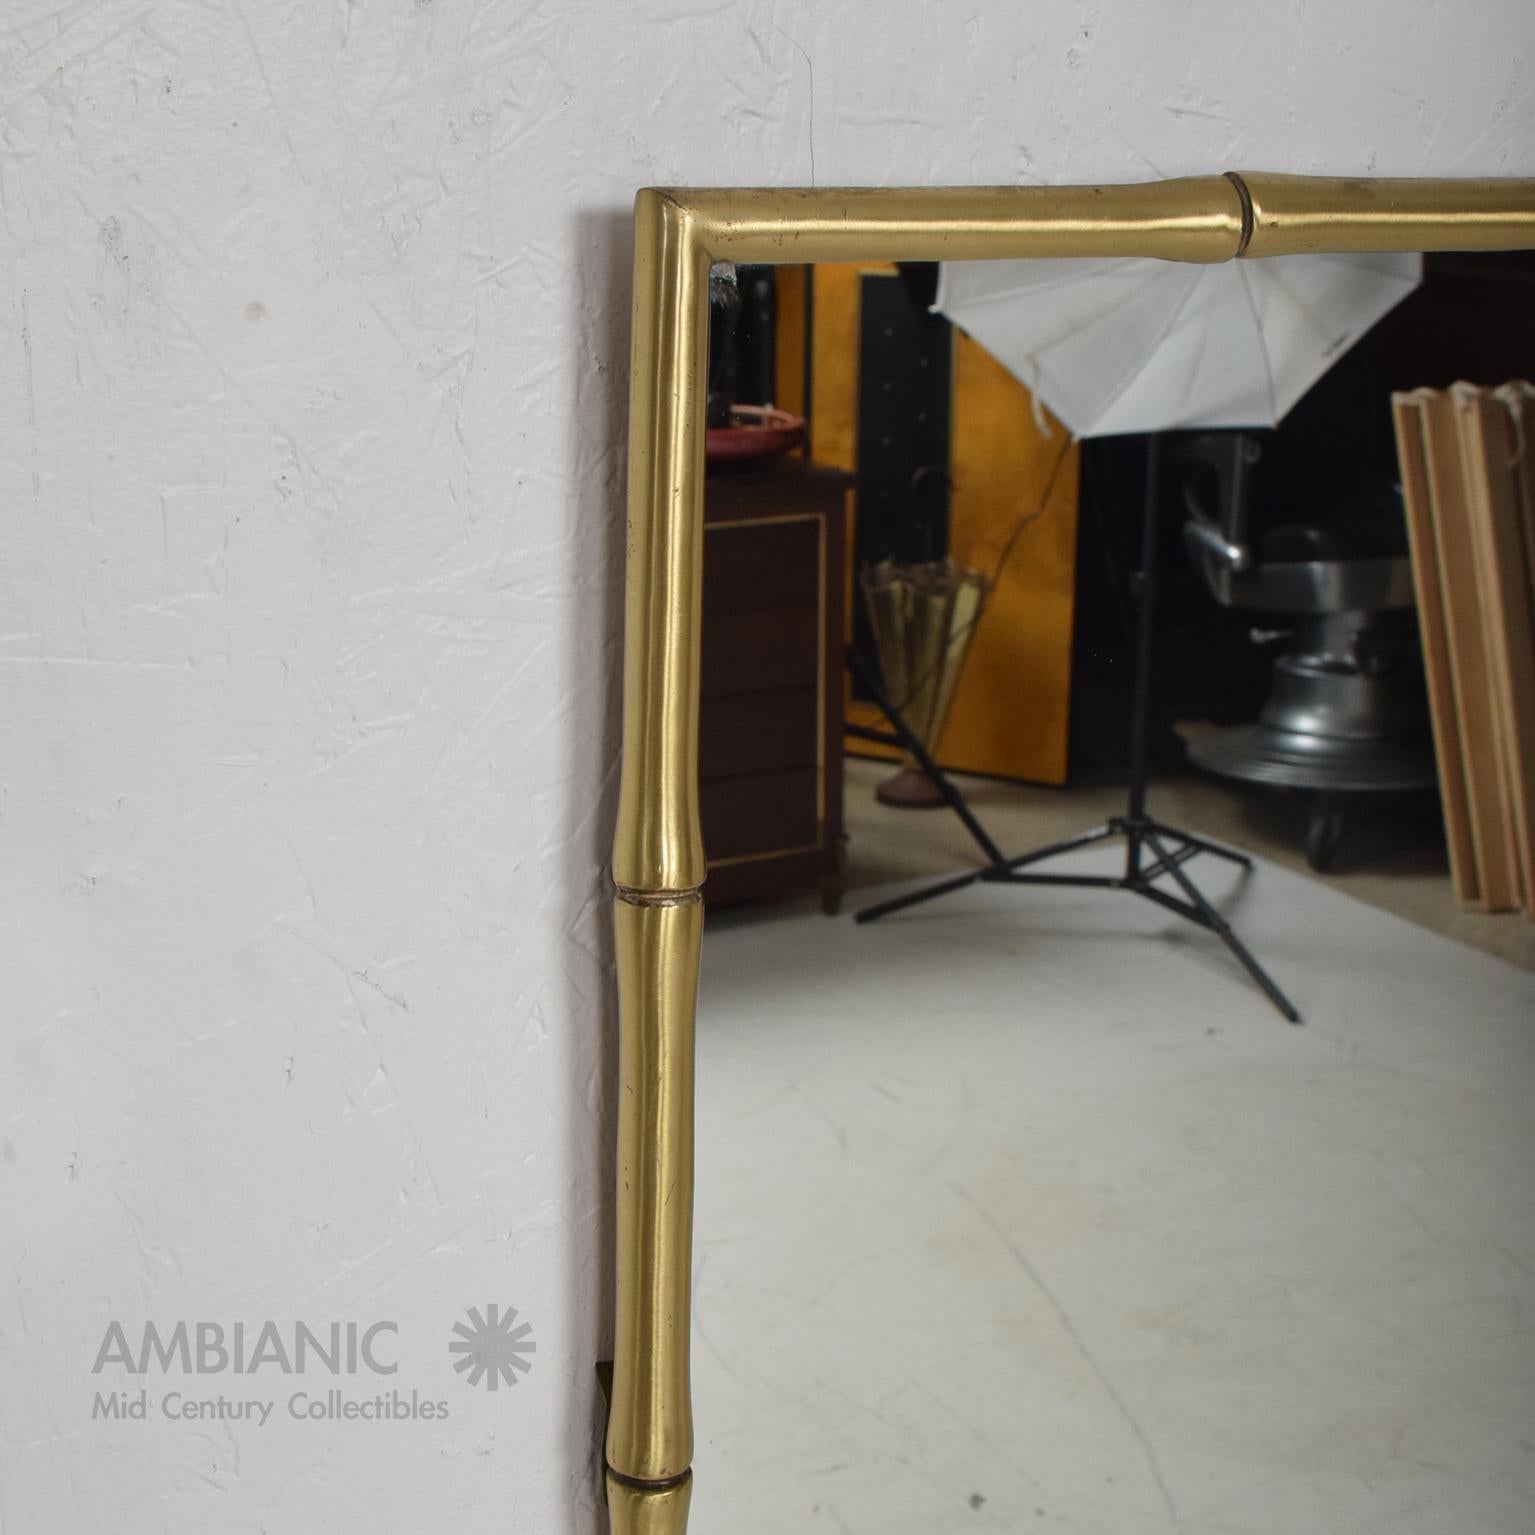 Mid-20th Century Regency Moderne Wall Mirror in Faux Bamboo Solid Brass Style James Mont 1960s